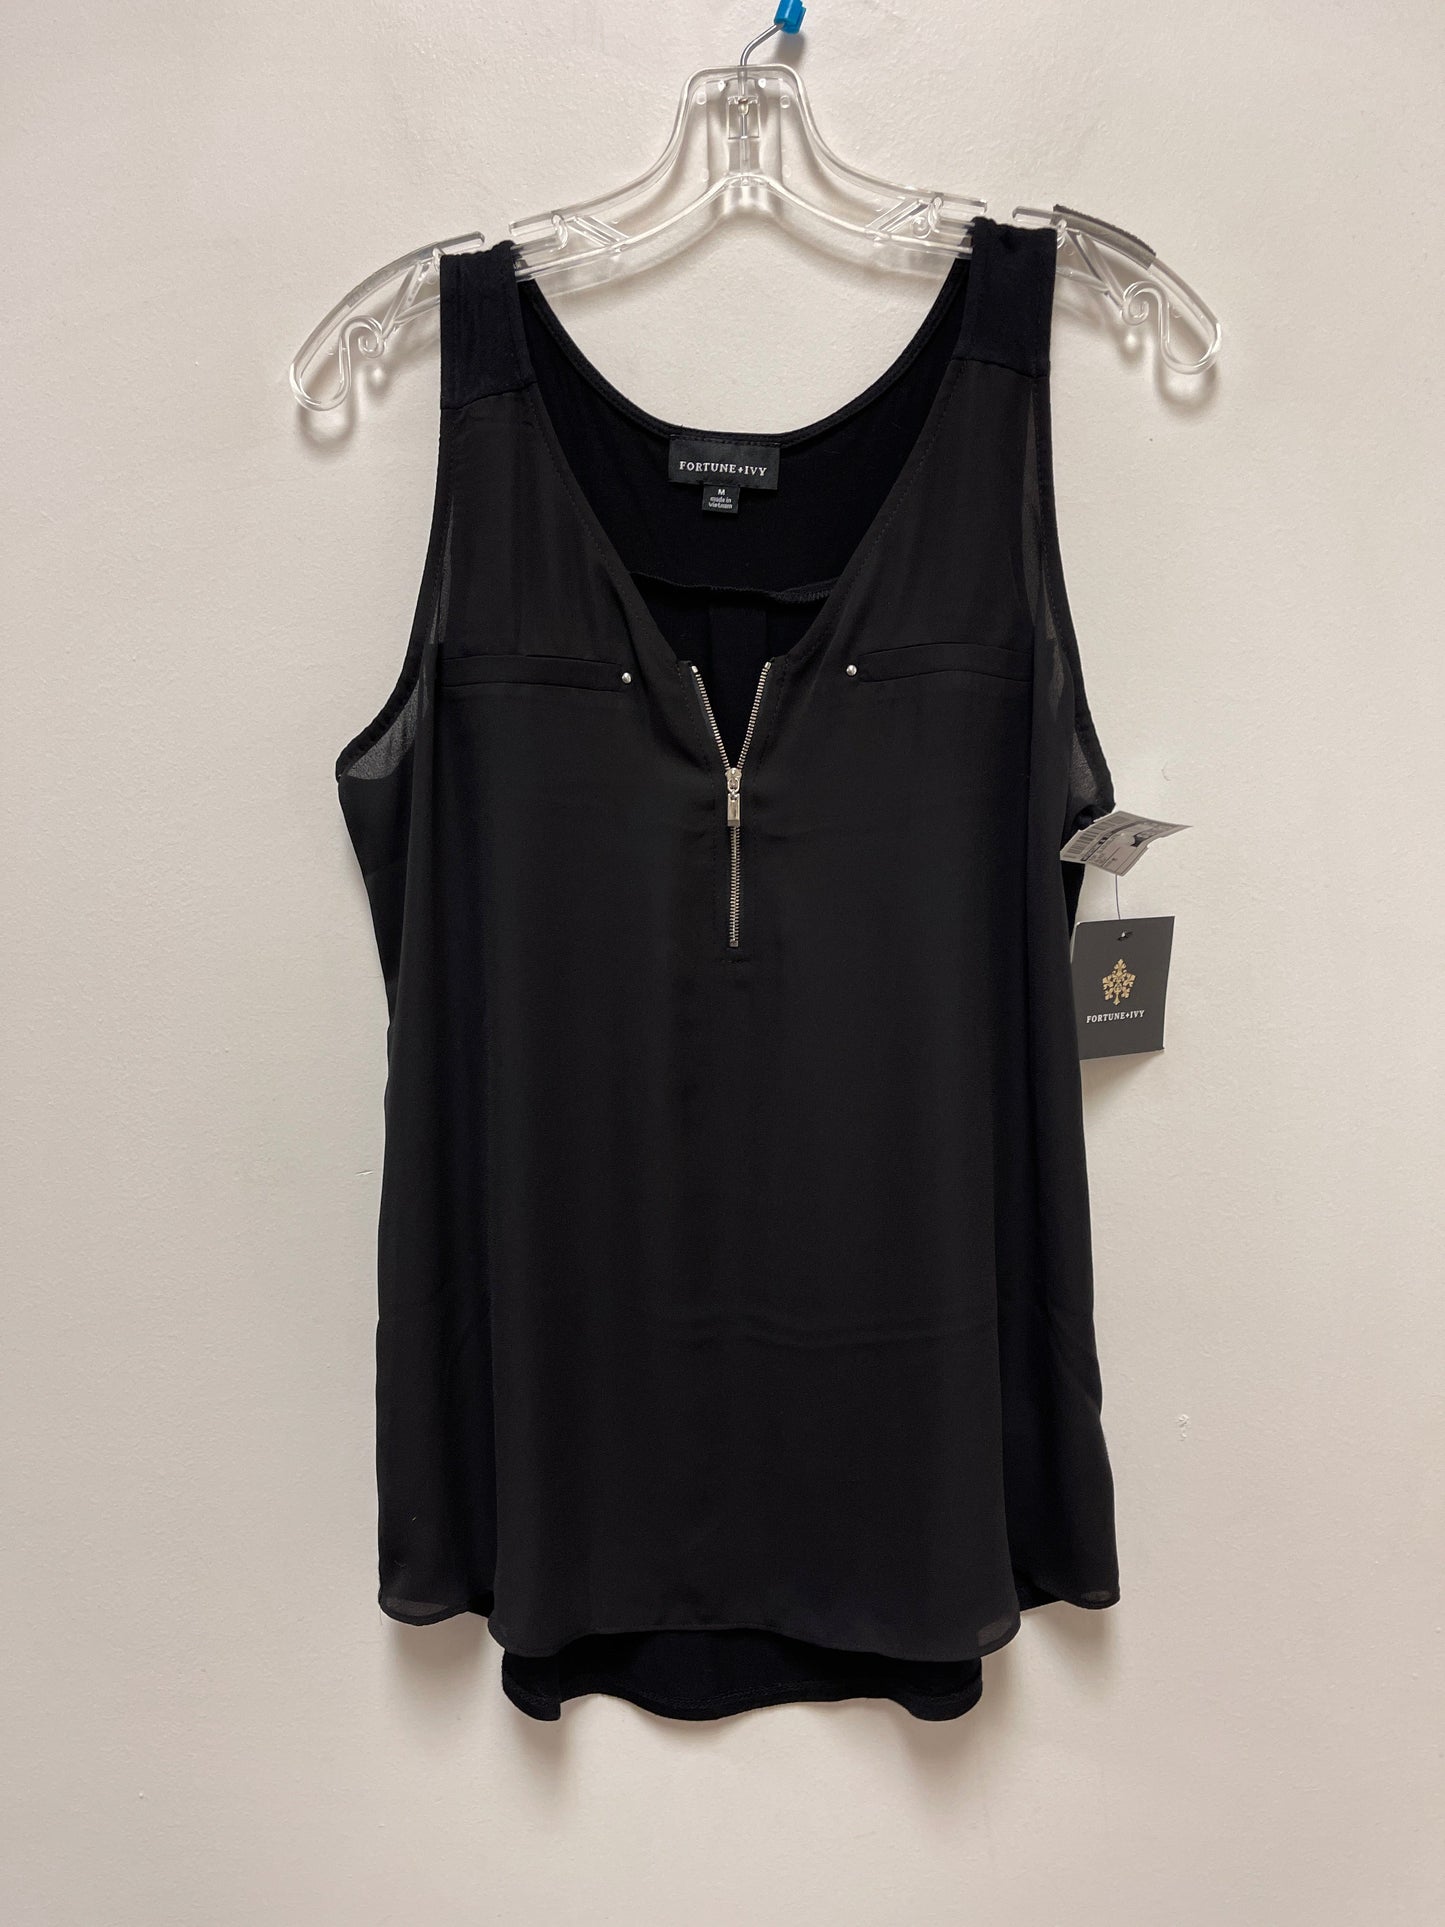 Black Top Sleeveless Fortune & Ivy, Size M